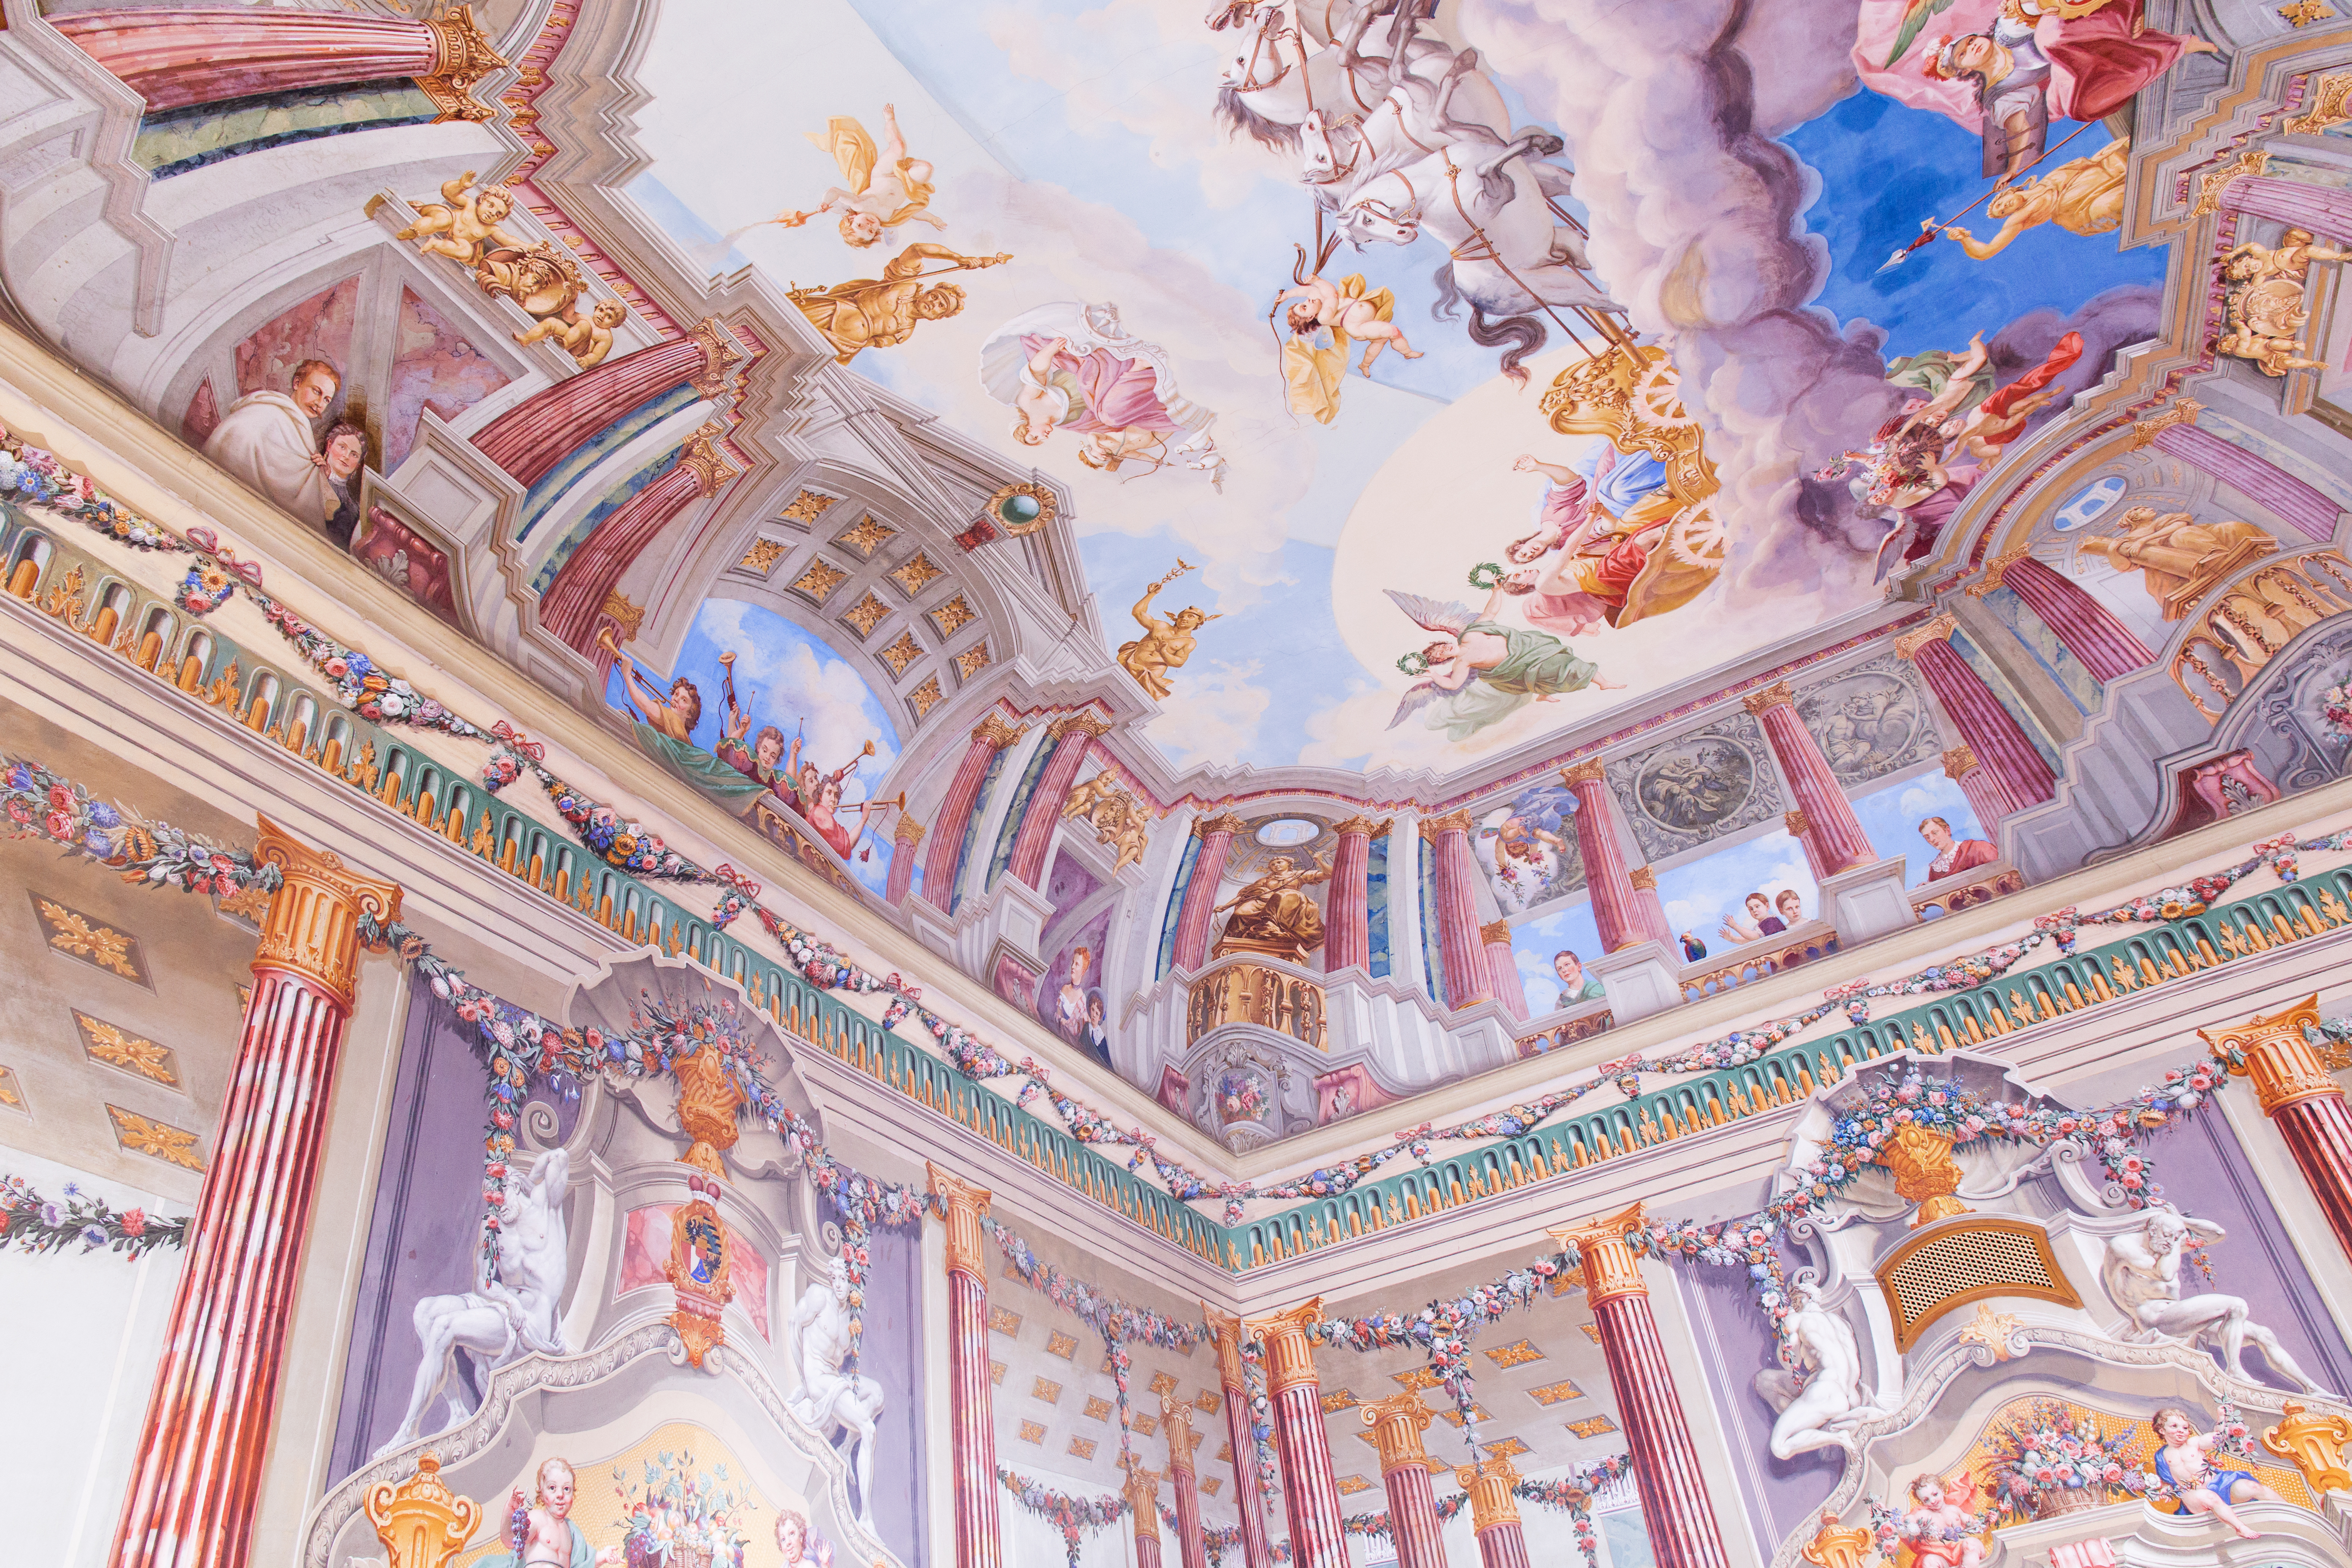 Photo of an elaborately decorated ceiling